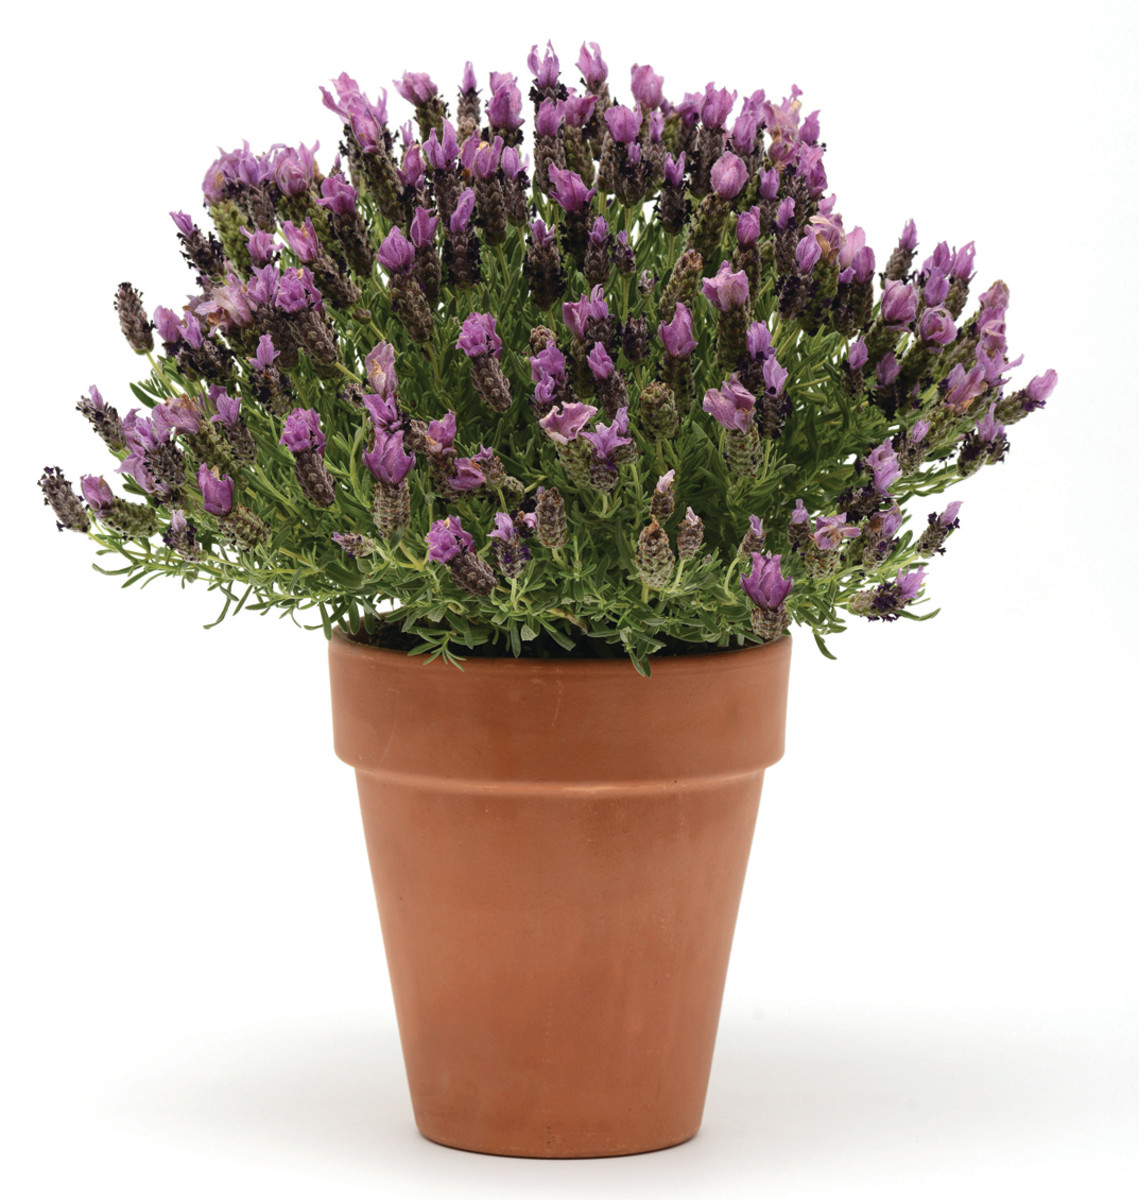 You Will Love 'Bandera Purple' Spanish Lavender - Horticulture